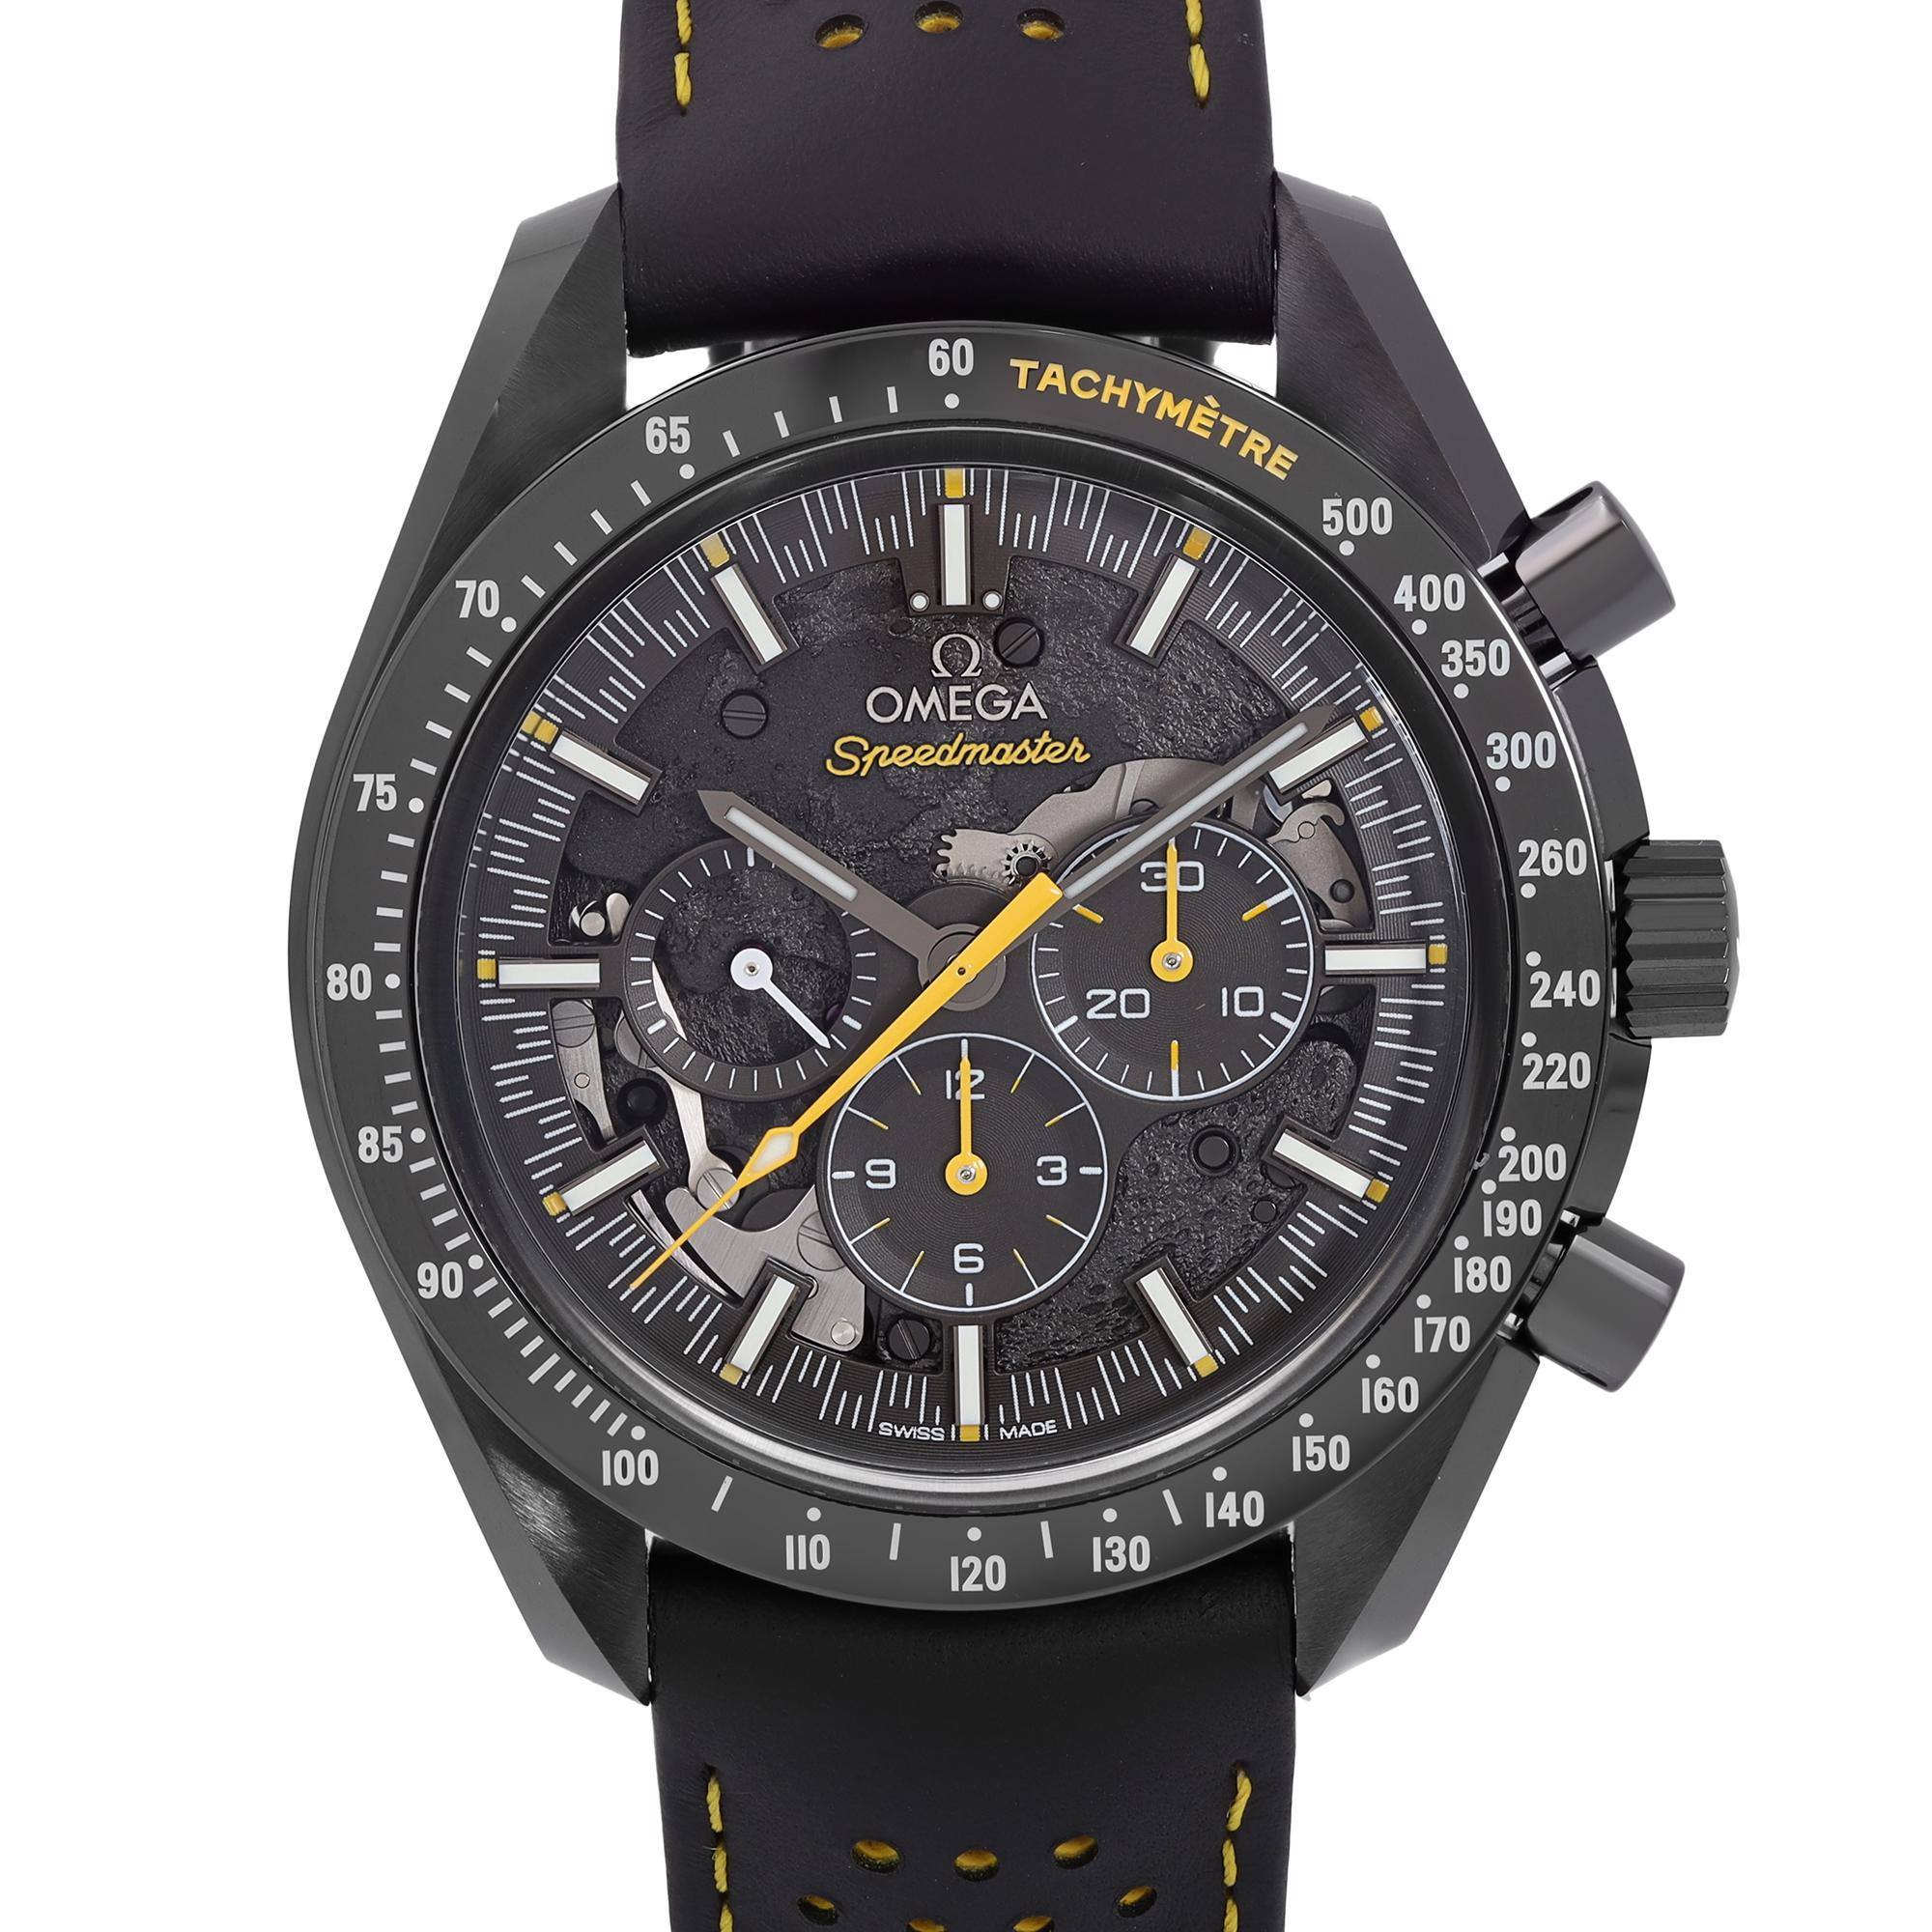 Unworn Omega Speedmaster Dark Side Of The Moon Apollo 8 Ceramic  Black Dial Men's Manual Wind Watch 311.92.44.30.01.001. This Beautiful Timepiece is powered by a Manual Wind  Movement and Features: Black Ceramic Case with a Black Rubber Strap, Fixed